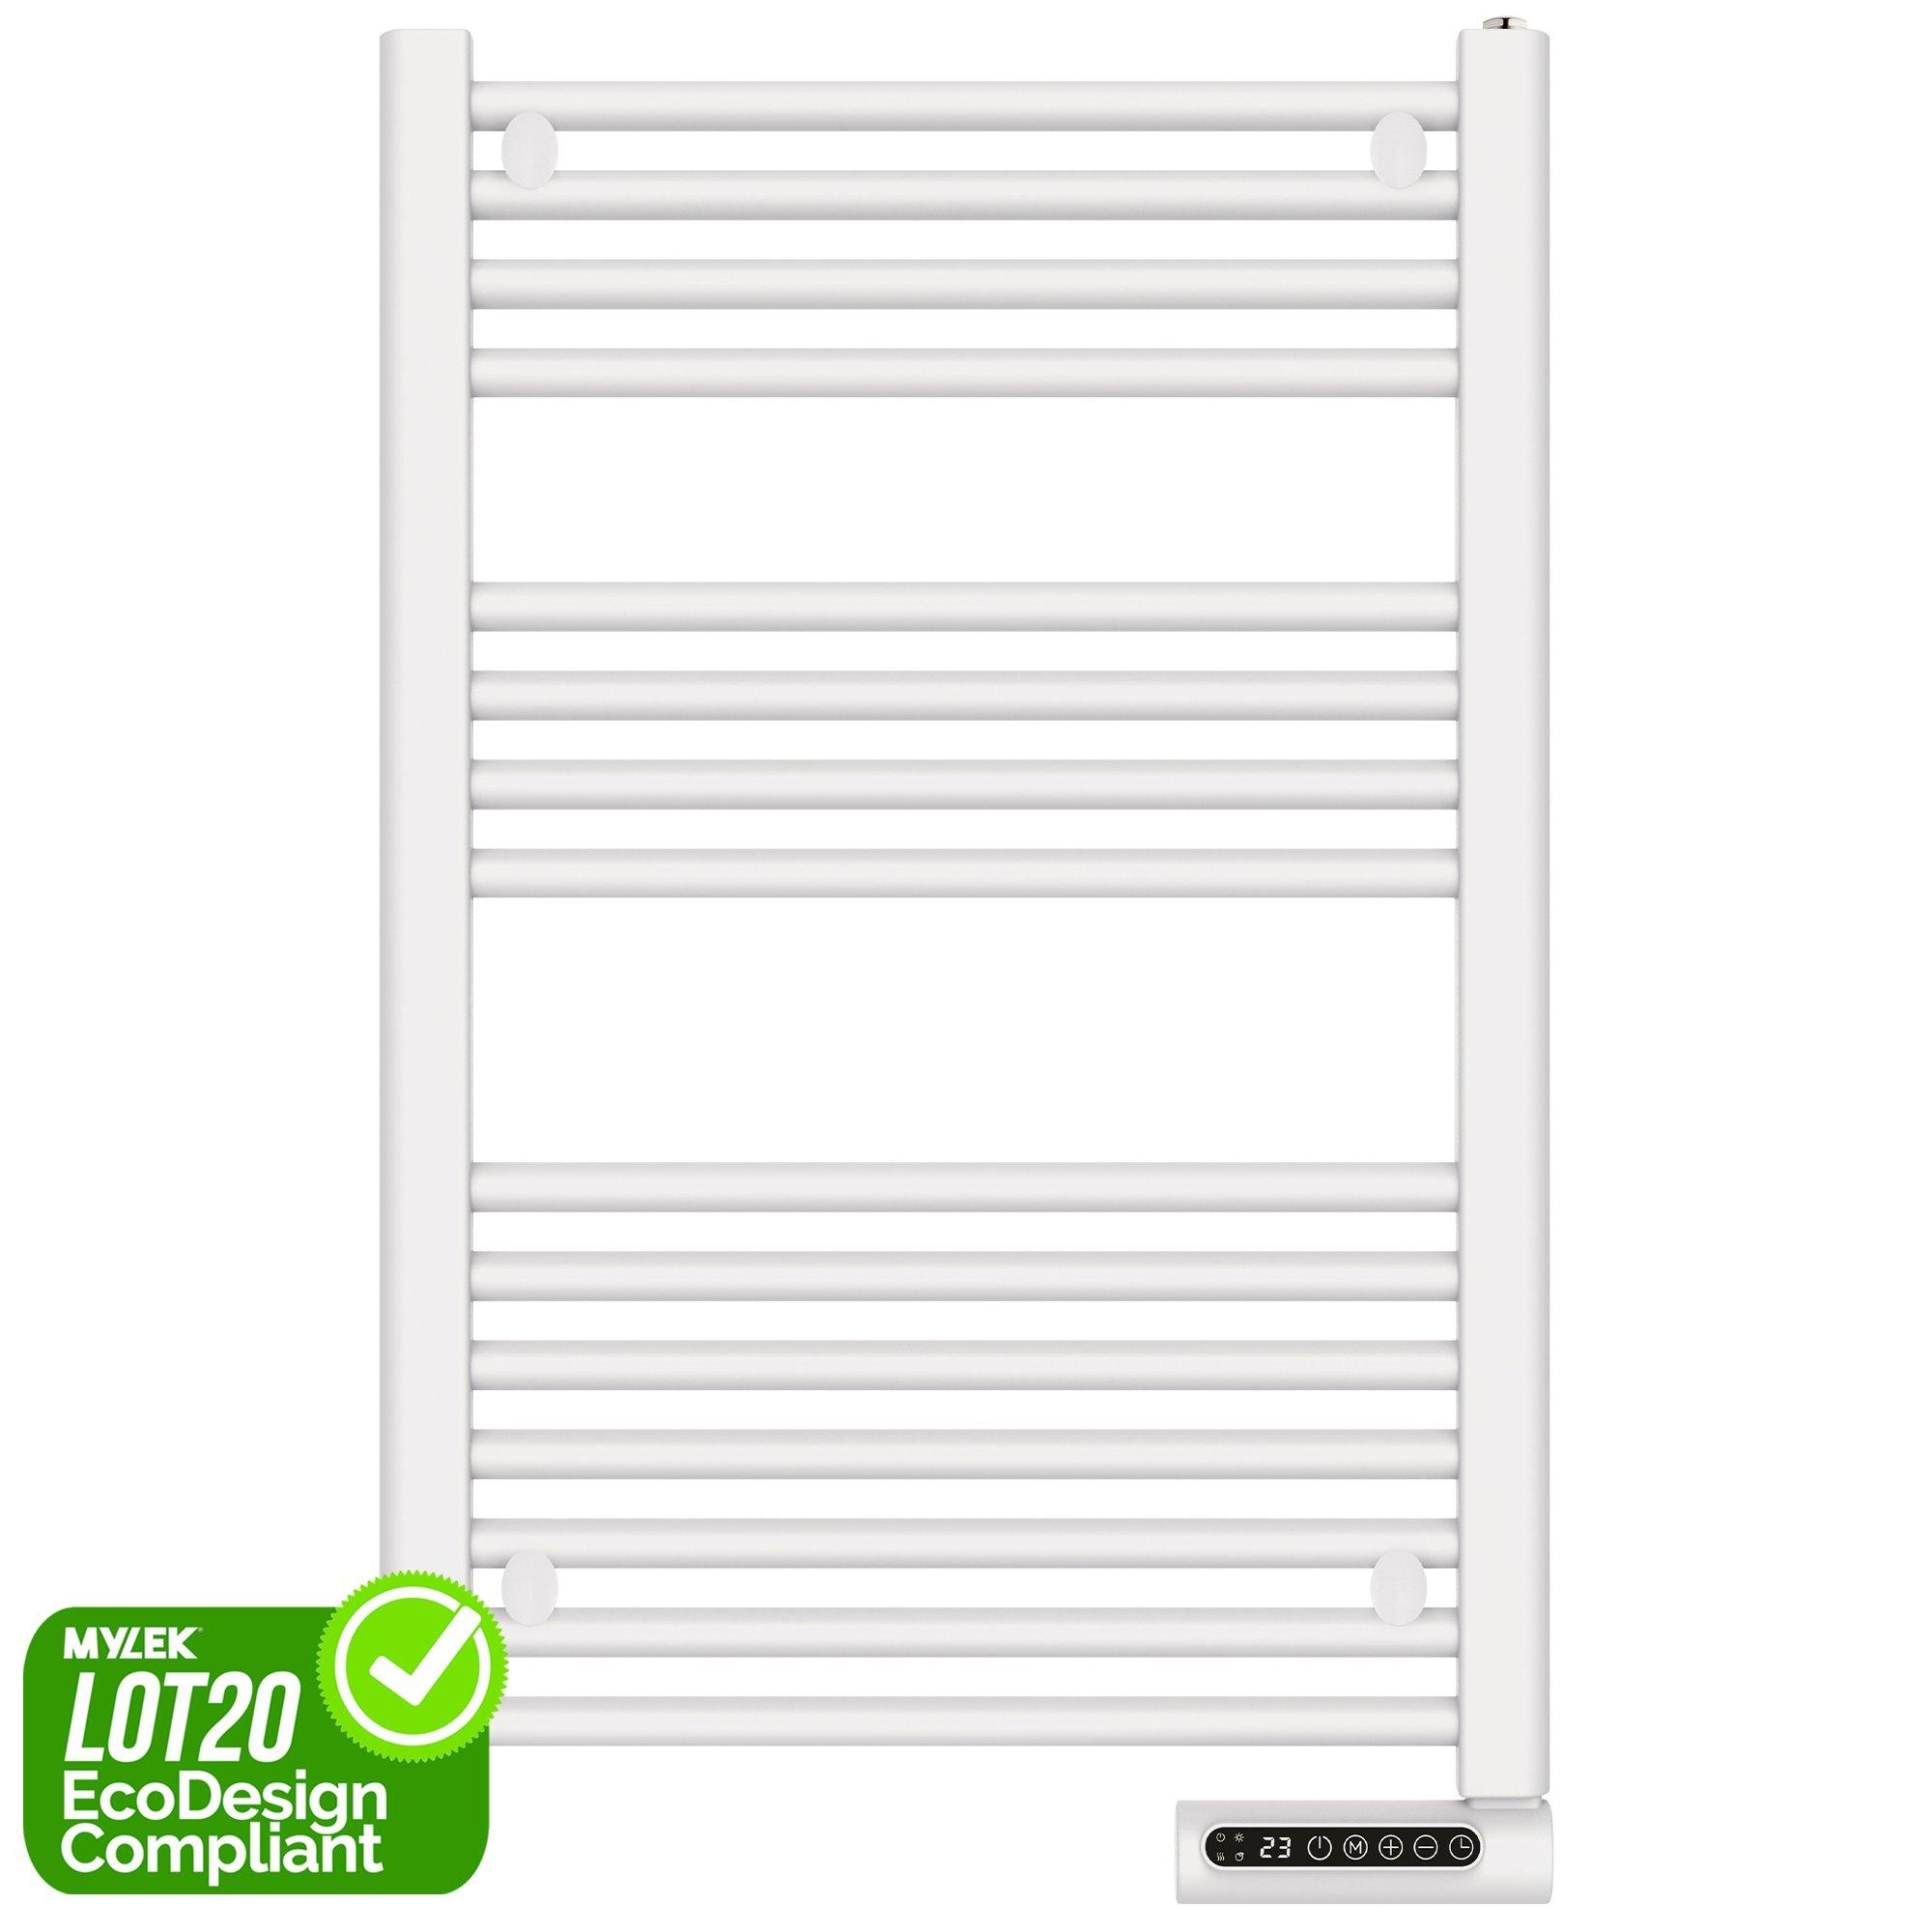 Towel Rail Bathroom Electric Heater with 24/7 Timer IP24 Rated 500W